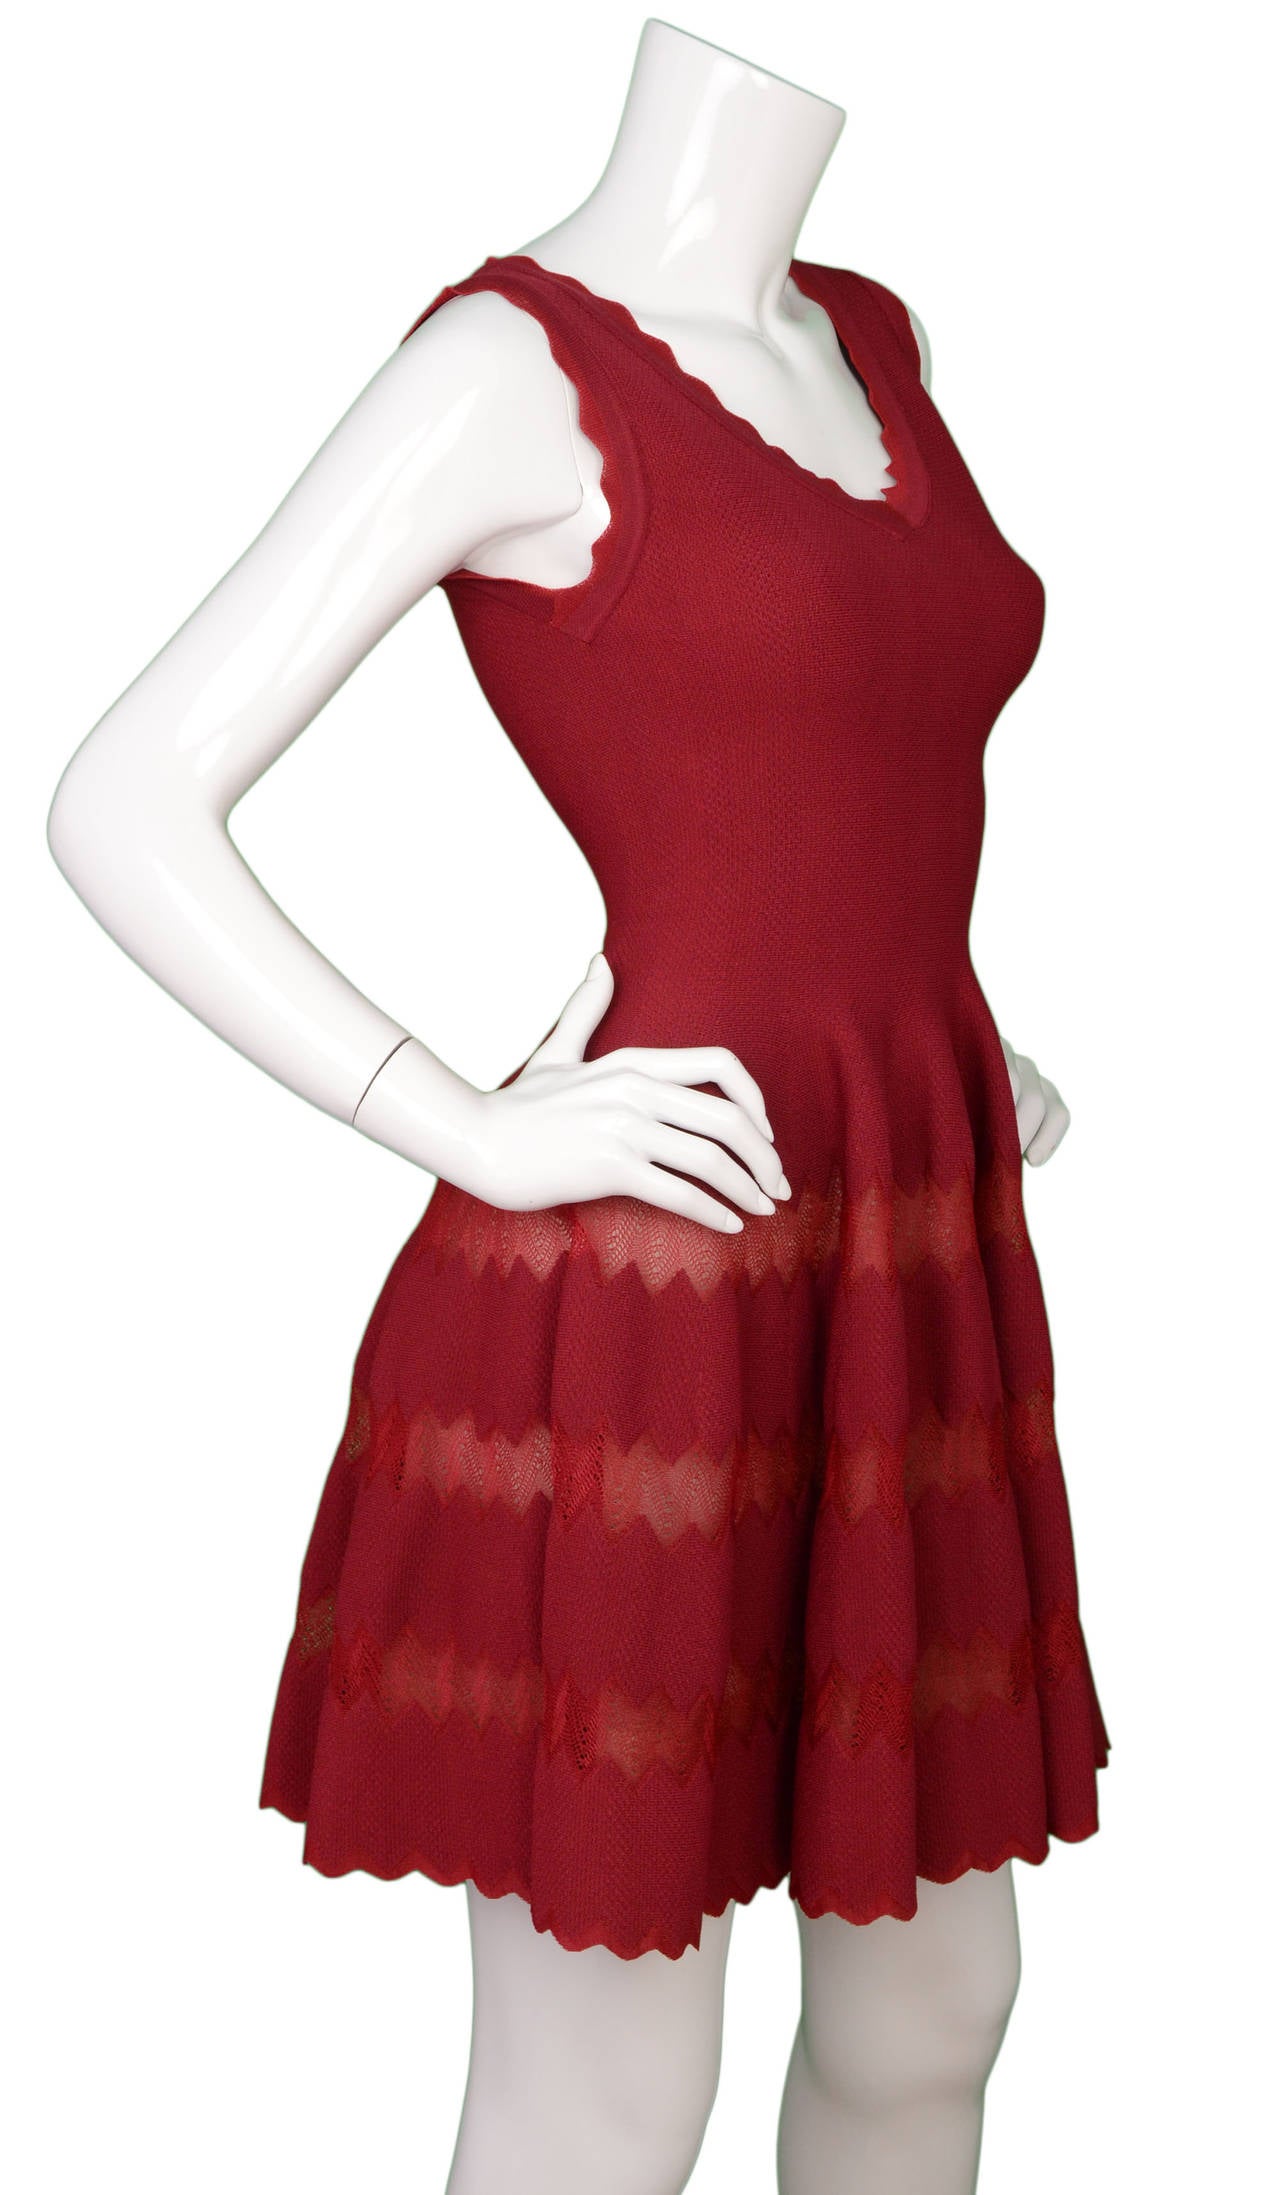 Alaia Burgundy Scalloped Skater Dress
Features zig zag design throughout
Made in: Italy
Color: Burgundy
Composition: 50% viscose, 40% silk, 10% polyester
Lining: Nude, 100% silk
Closure/opening: Back center zip up
Exterior Pockets: